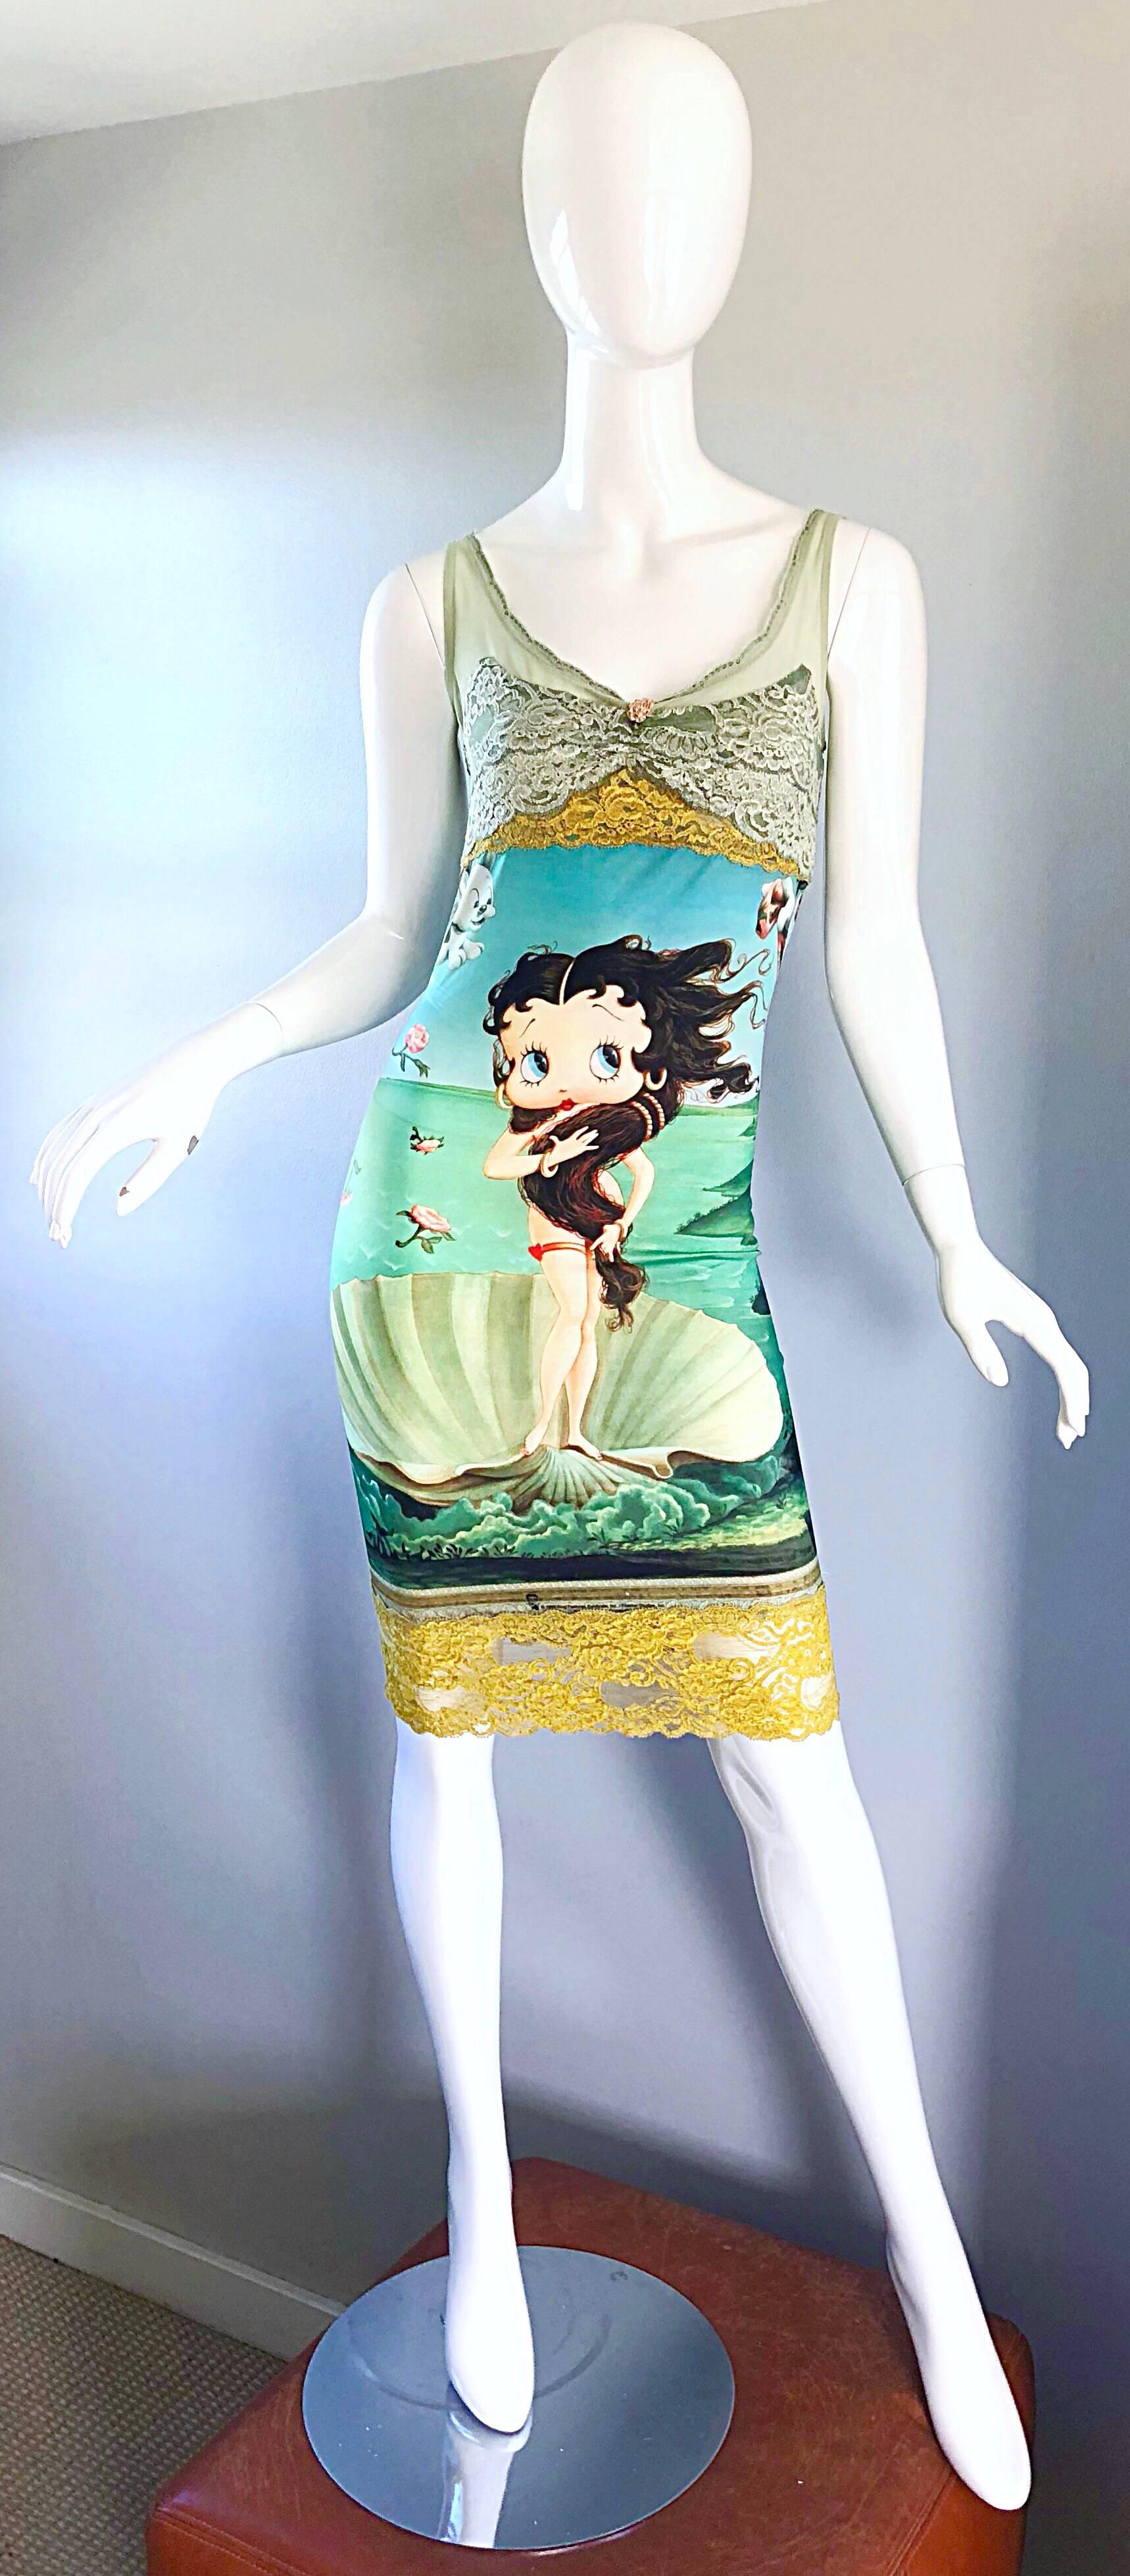 Super rare Limited Edition ELETRA CASADEI vintage 90s Betty Boop, "Birth of Venus," novelty print slip dress! Features the classic artistic print, with a novelty approach. Casadei dresses are hard to come by. I have had this dress once